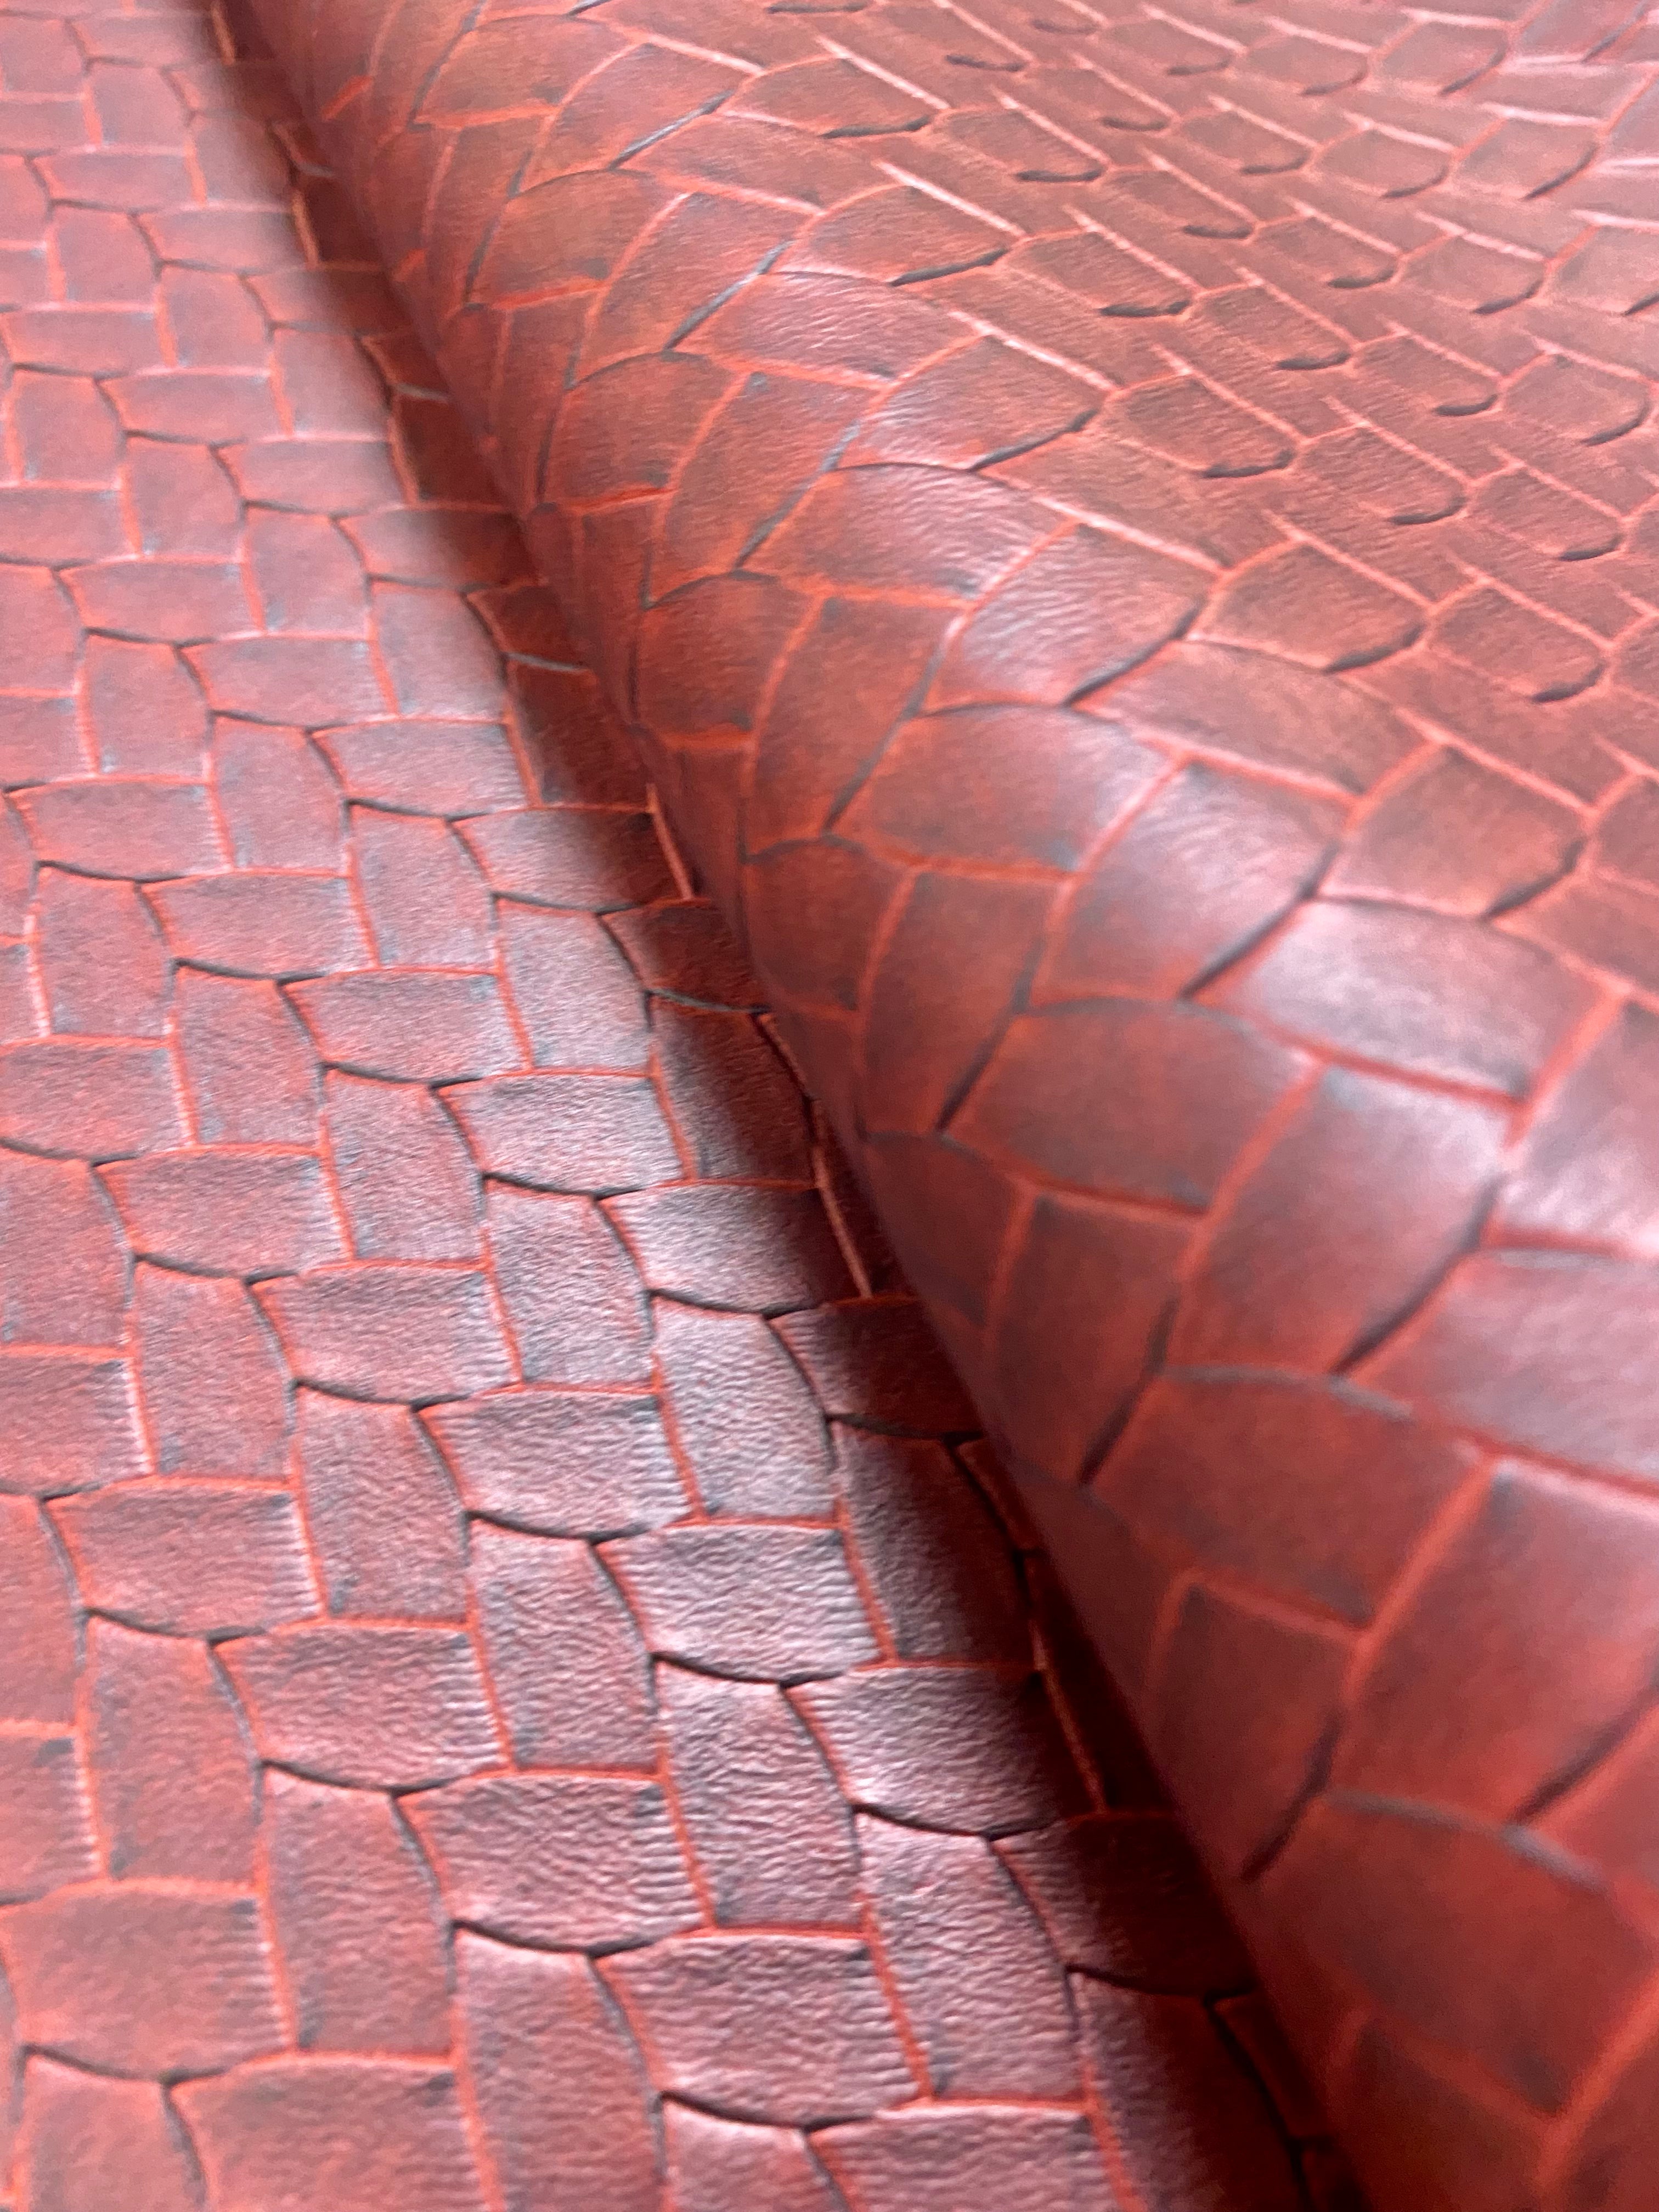 PINK ALLIGATOR Faux Leather Sheets Faux Leather Sheets 